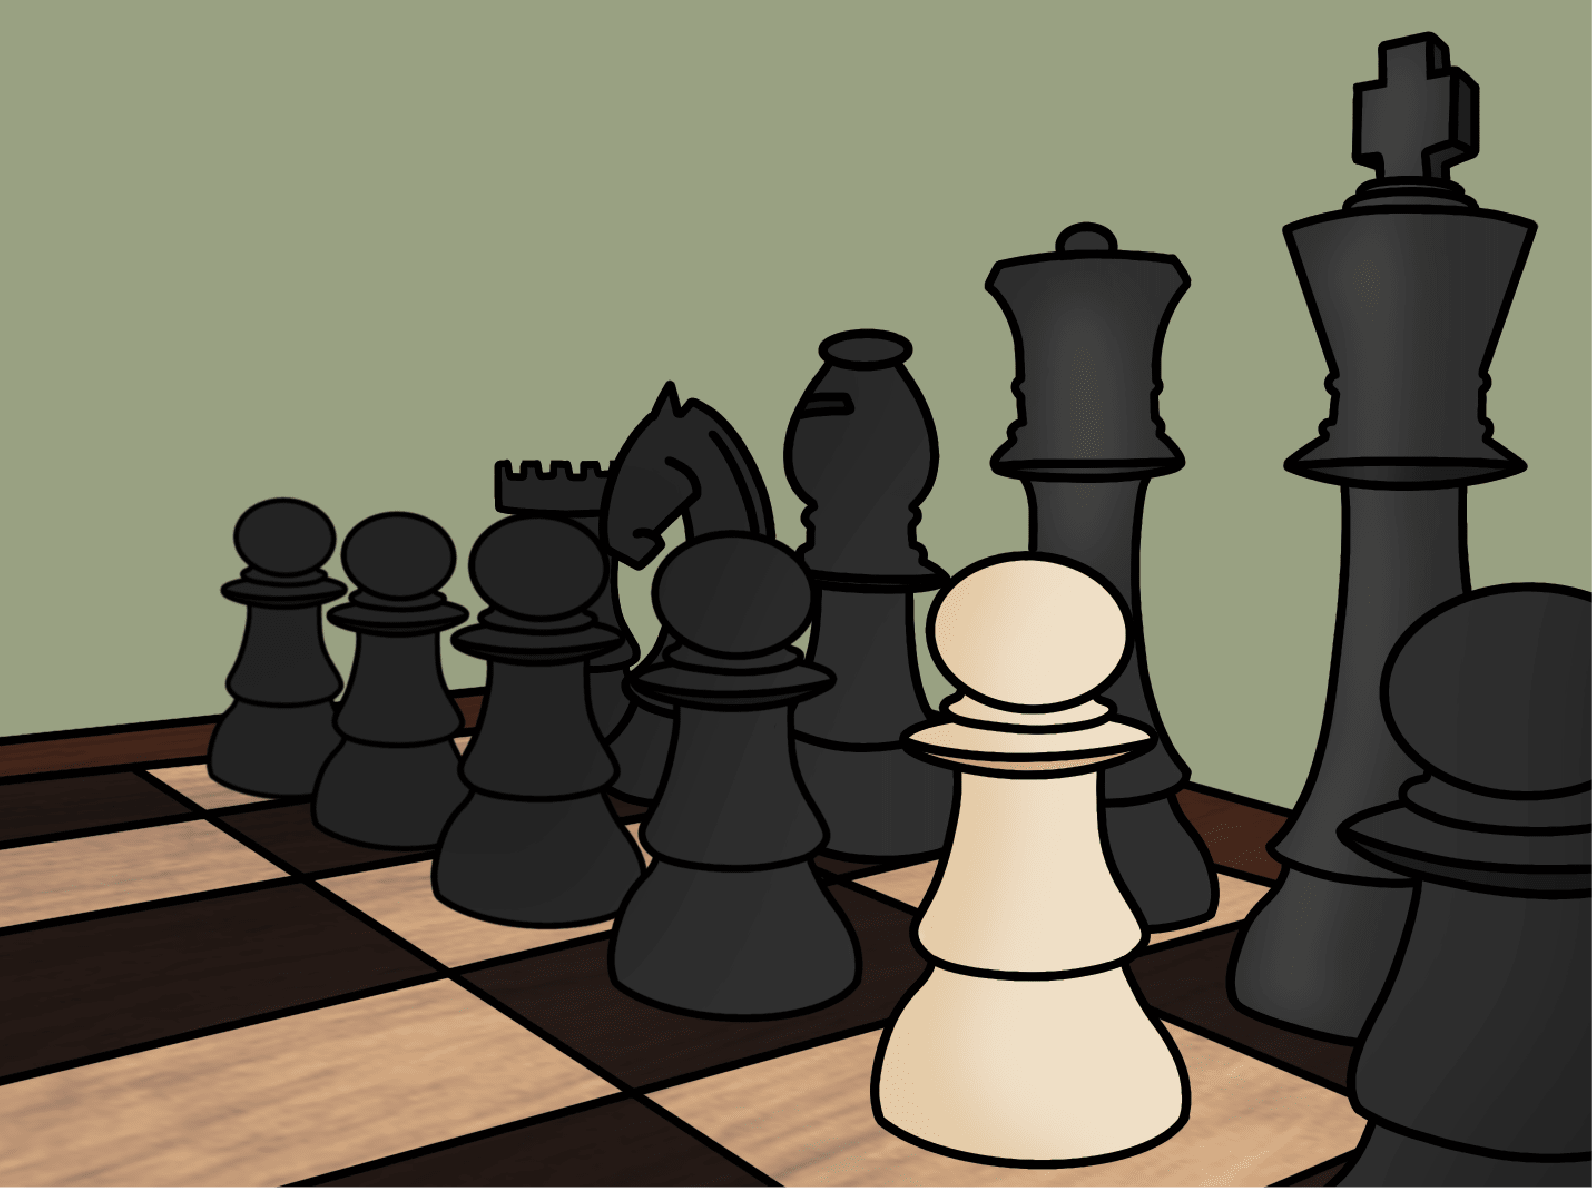 illustration of chess figures on a chessboard